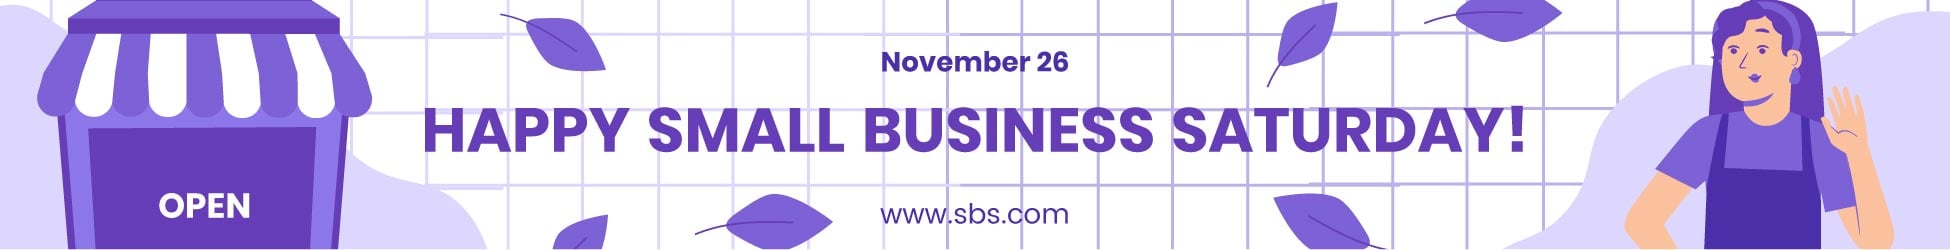 small-business-saturday-website-banner